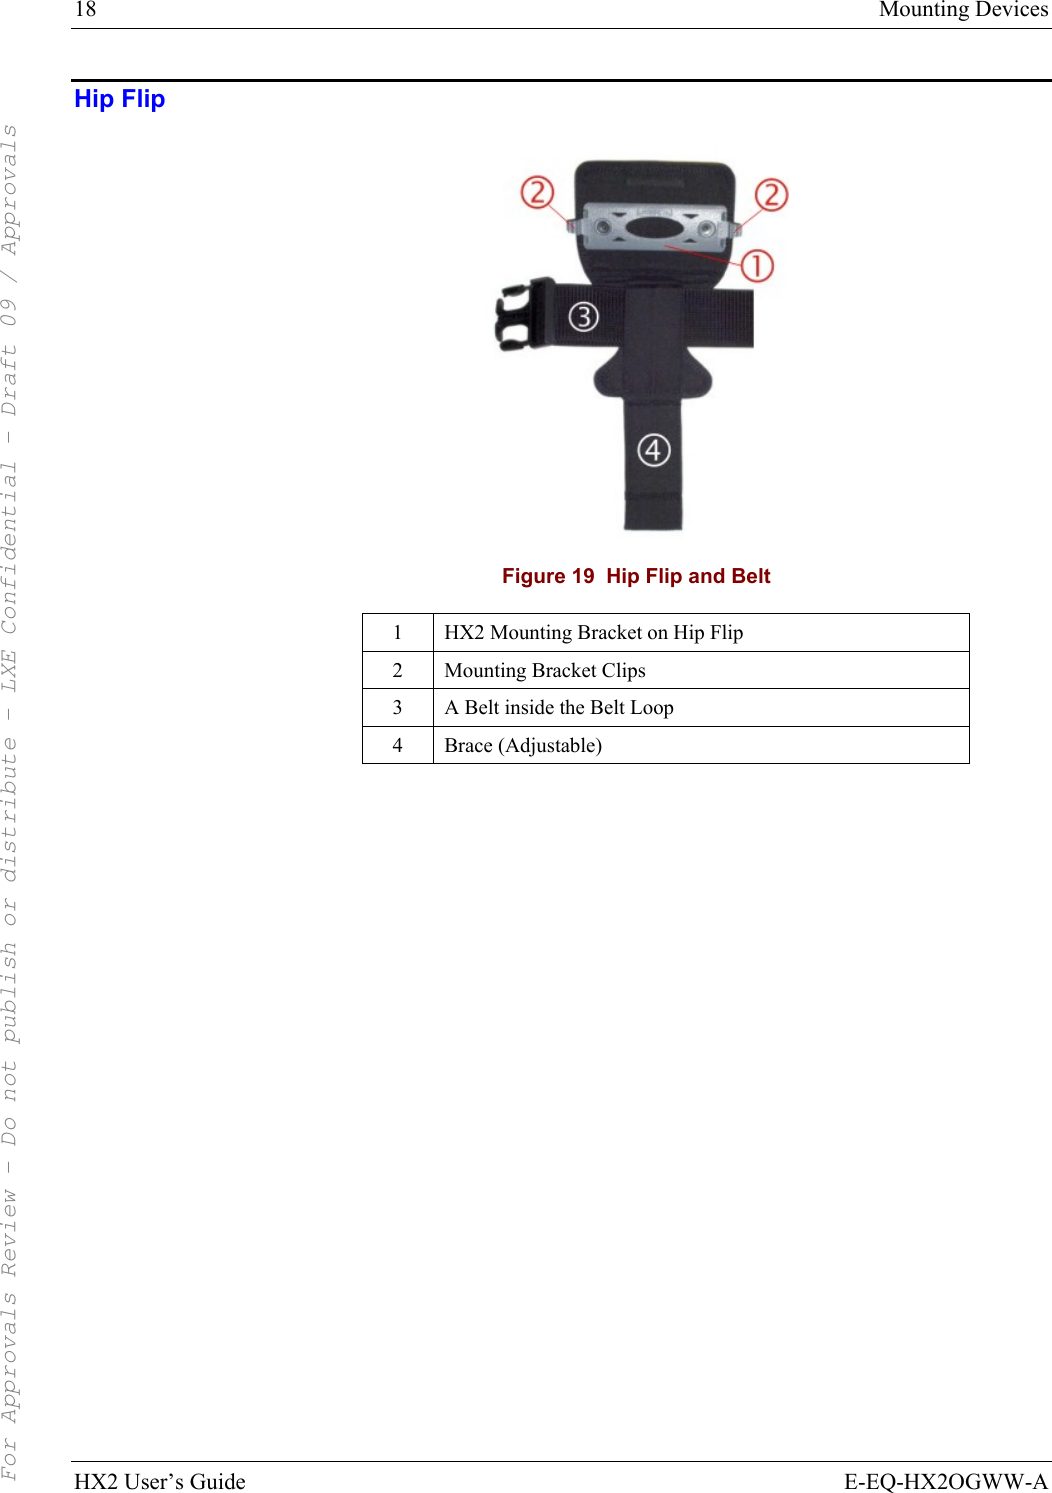 18  Mounting Devices HX2 User’s Guide  E-EQ-HX2OGWW-A Hip Flip  Figure 19  Hip Flip and Belt 1  HX2 Mounting Bracket on Hip Flip 2  Mounting Bracket Clips 3  A Belt inside the Belt Loop 4  Brace (Adjustable)     For Approvals Review - Do not publish or distribute - LXE Confidential - Draft 09 / Approvals